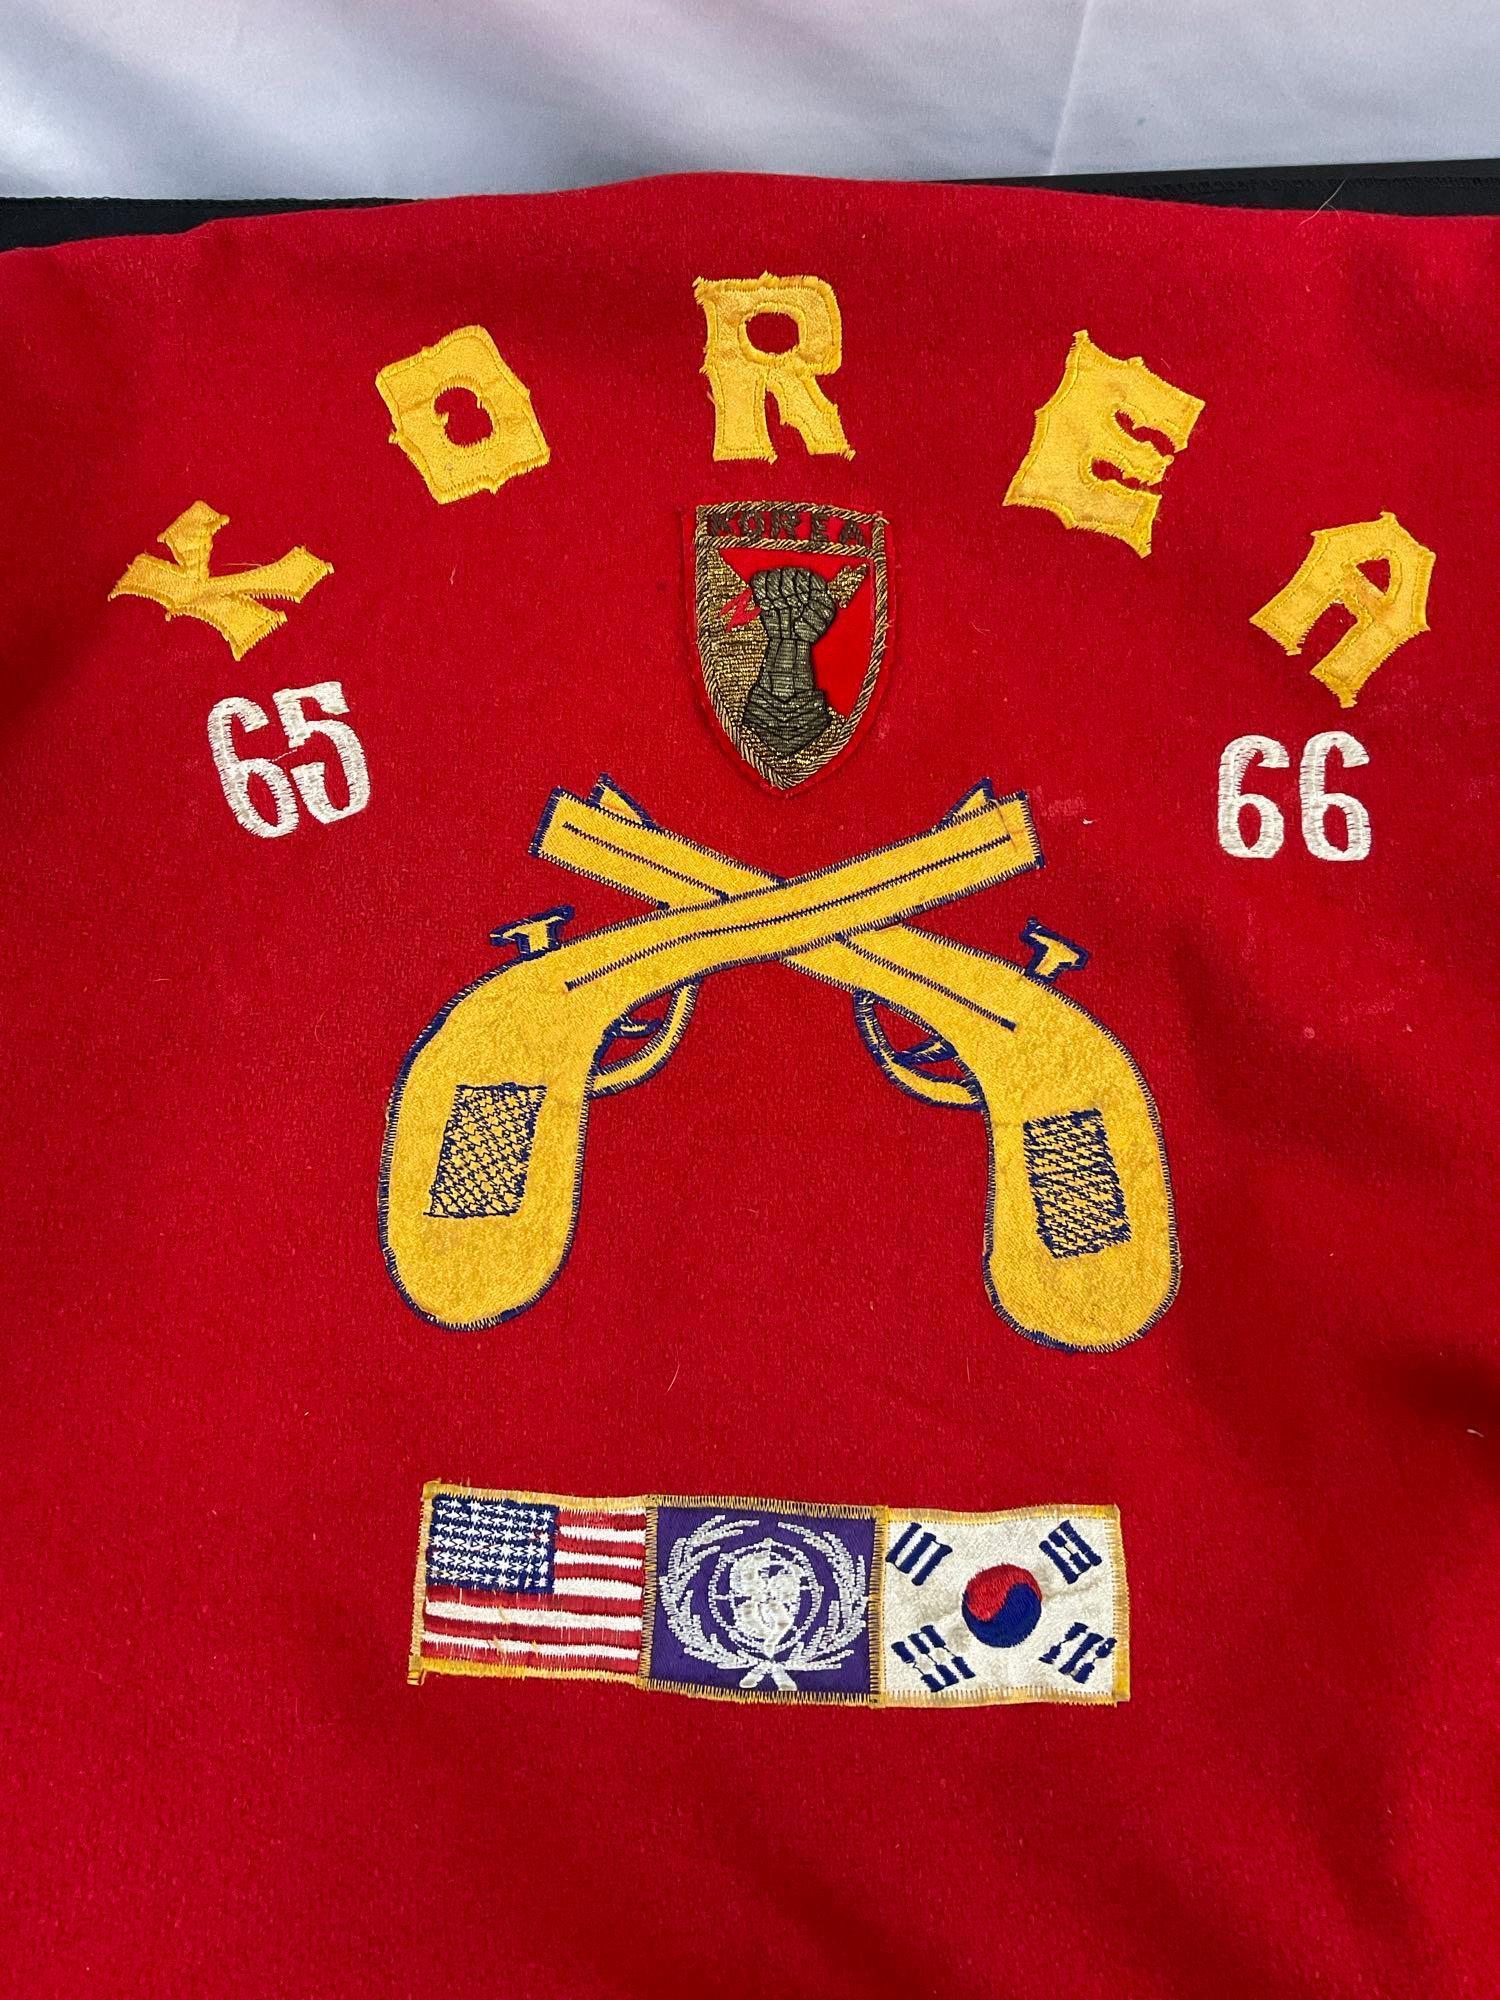 Vintage Sportswear Men's Size 40 Red Wool Letterman Jacket w/ RMC, Korea 65-66 Patches. See pics.